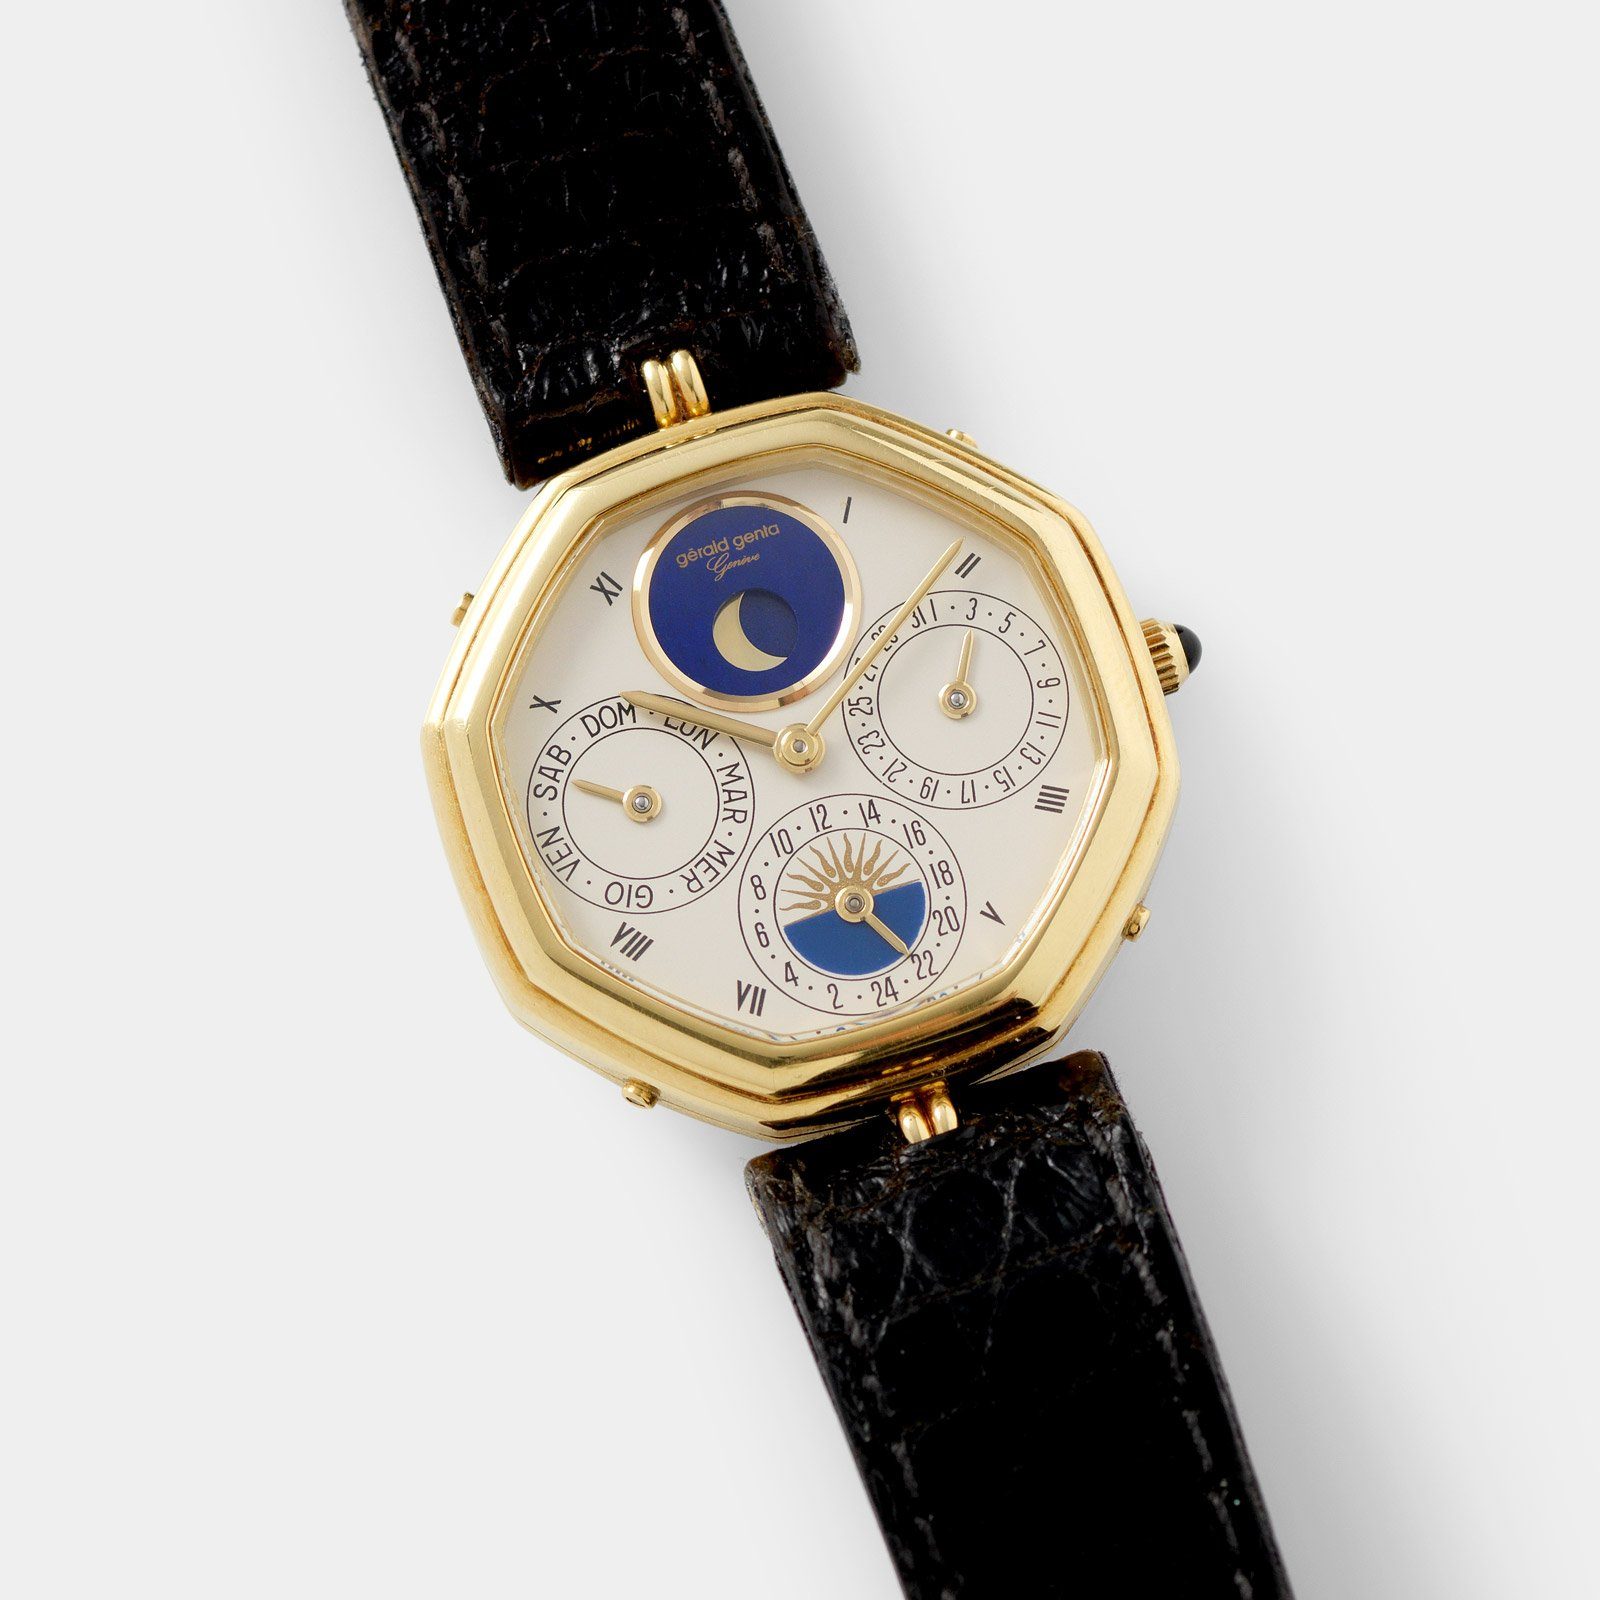 Gerald Genta “Succes “Day Date Moon Phase Ref 2747 with 24-hour indicator